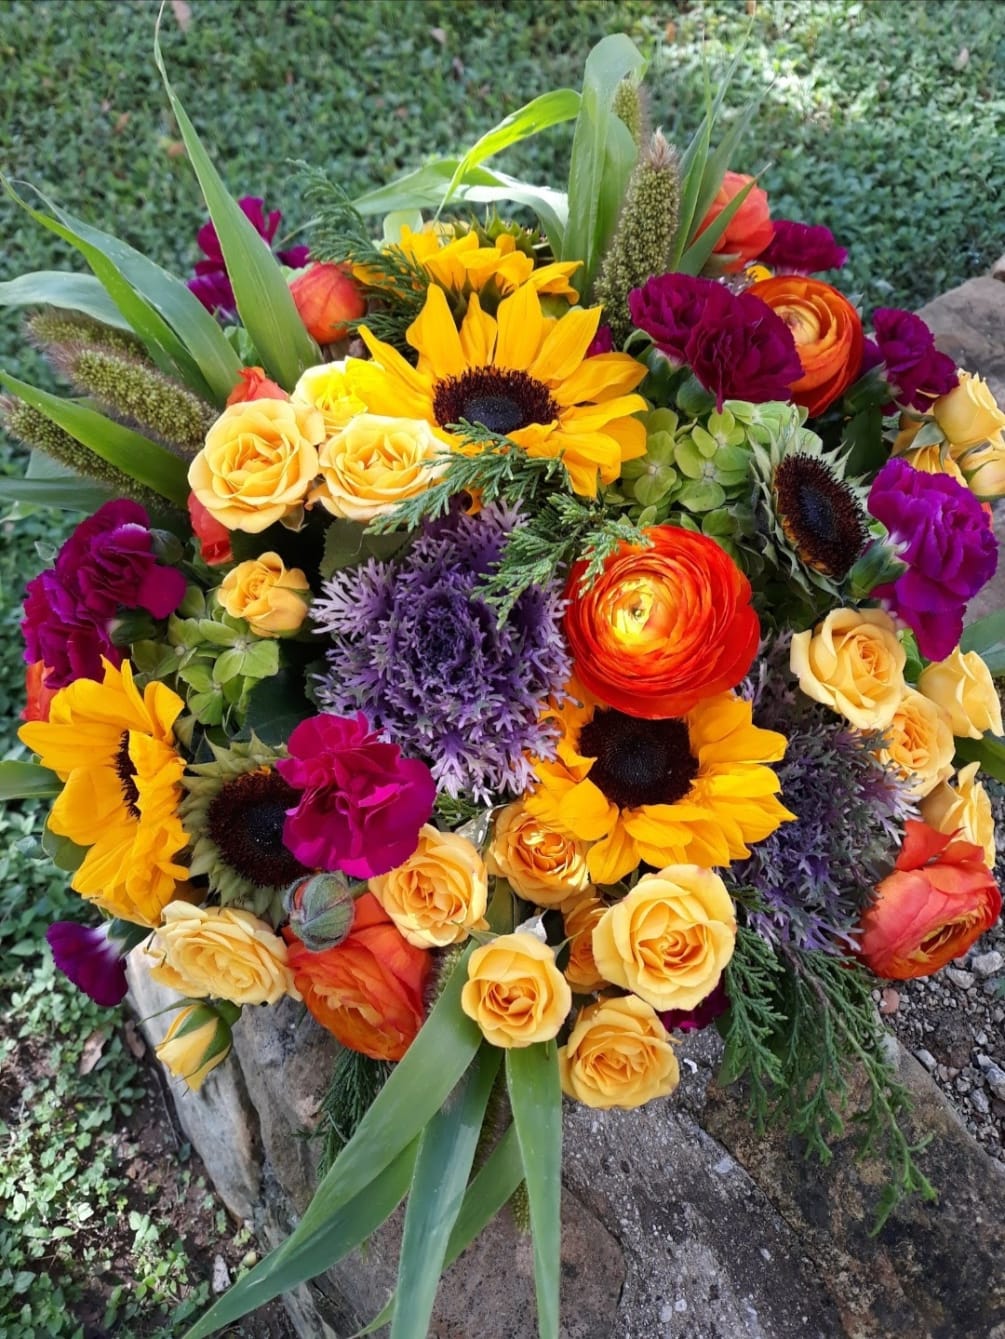 Lovely grouping of blooms in beautiful warm hues. This would perfect for